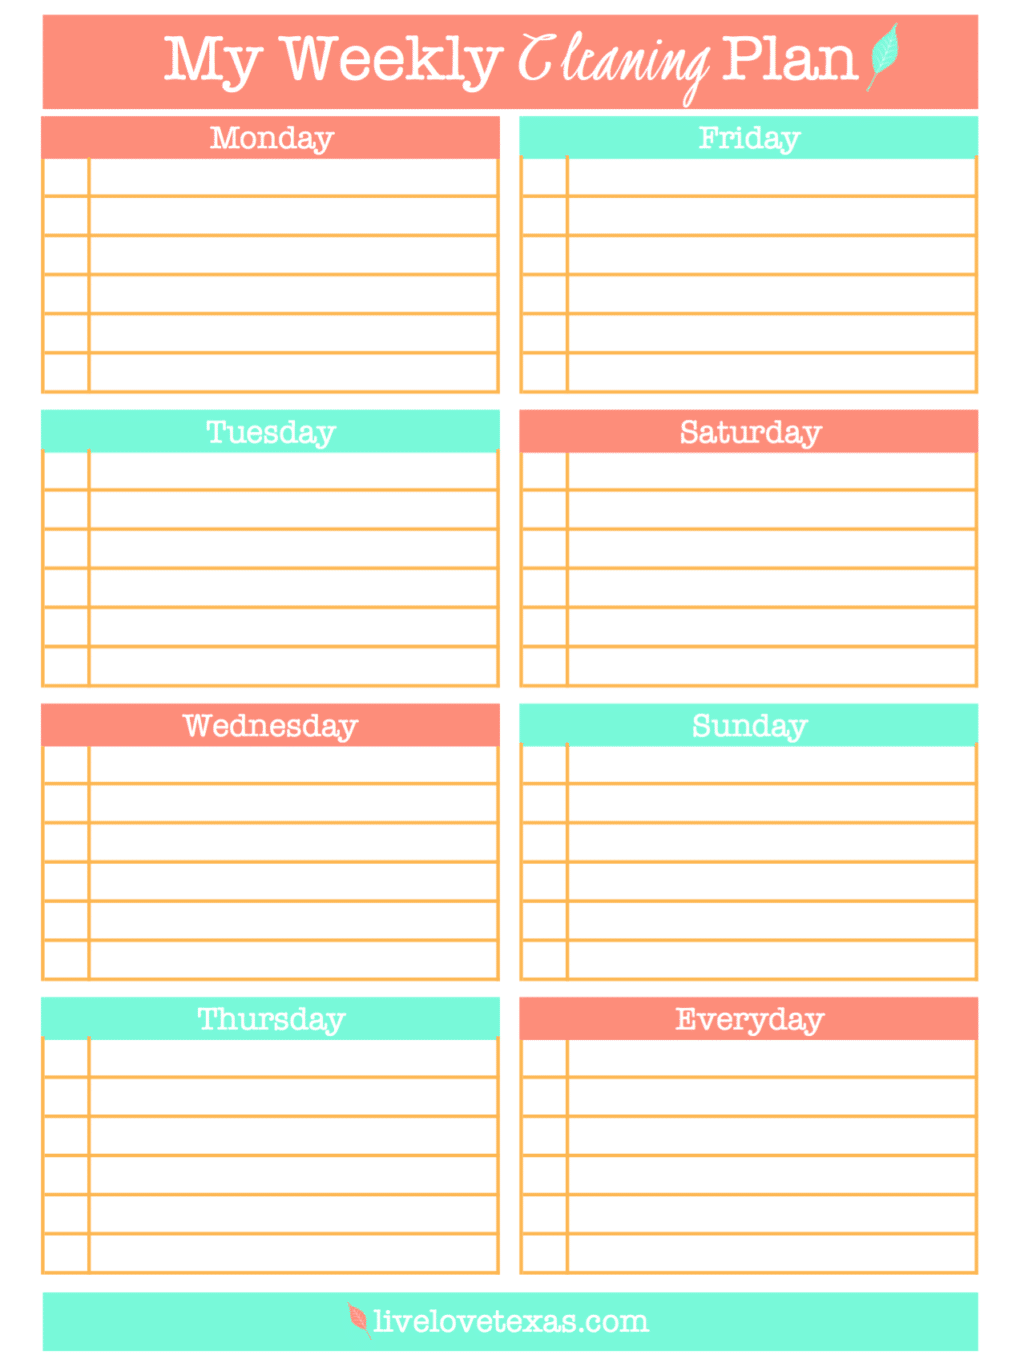 Ready to spring clean your house or just get organized and not spend your entire Saturday cleaning? Then check out this FREE Daily/Weekly Cleaning Printable.